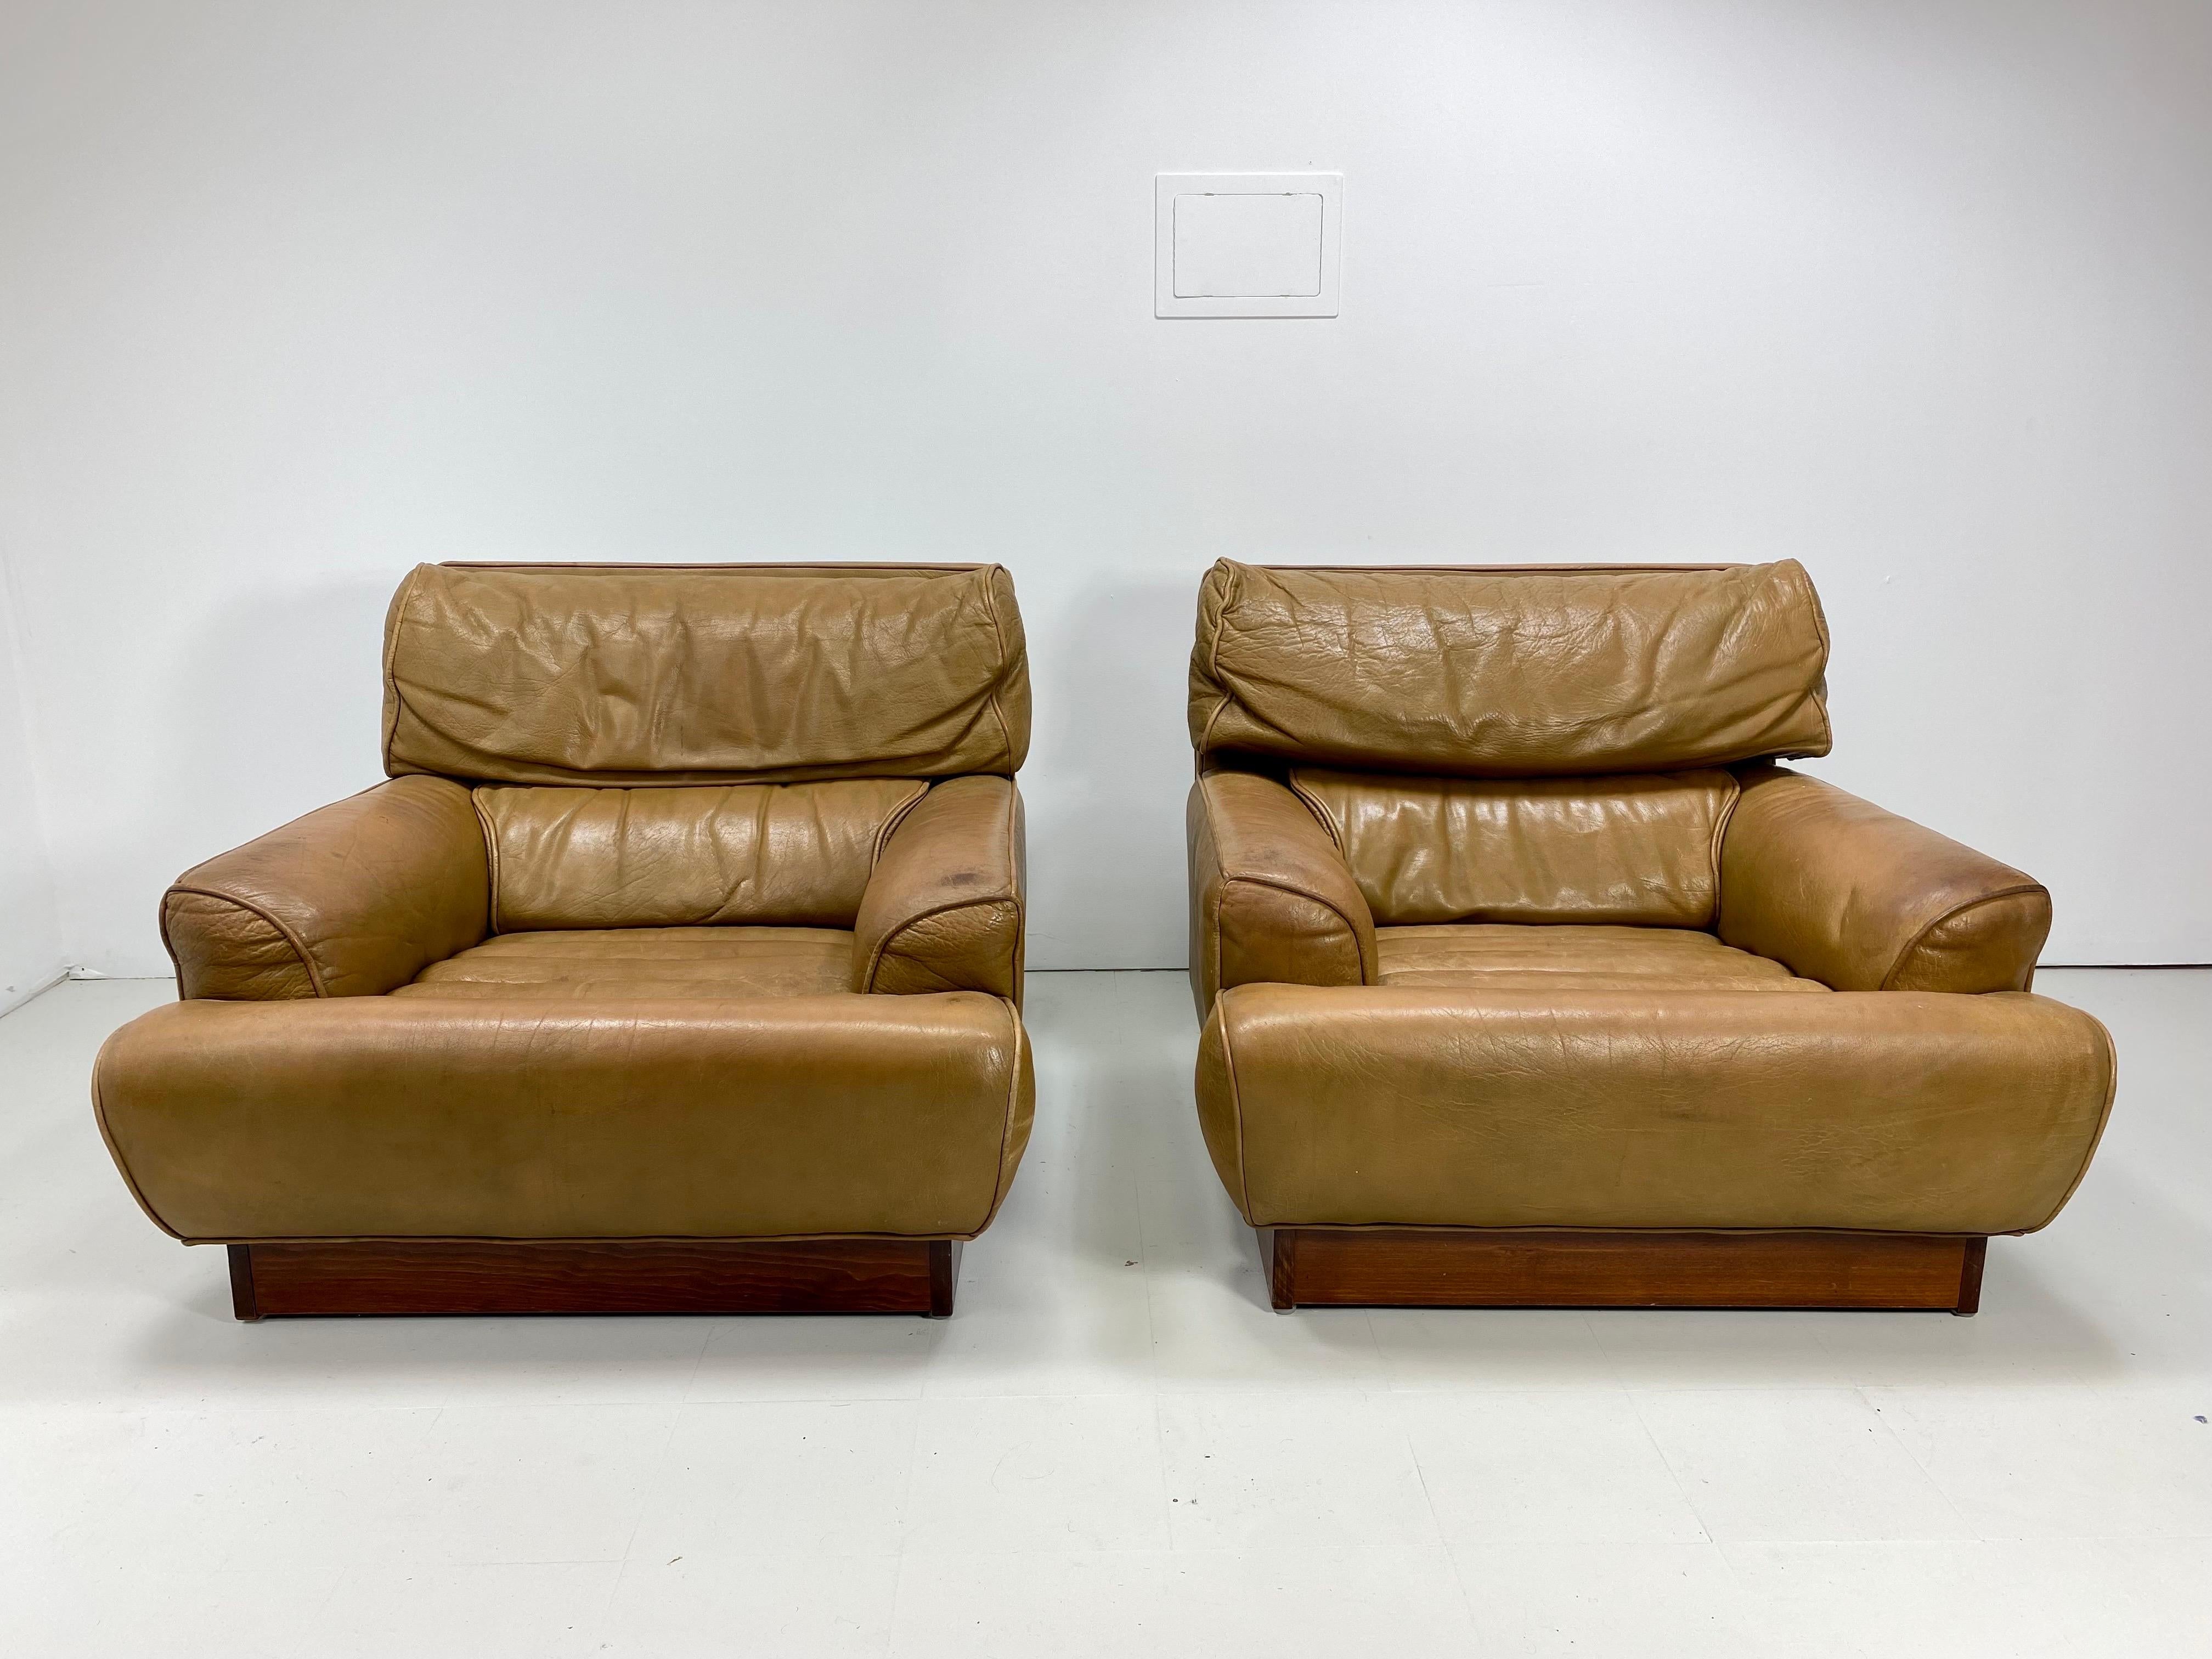 Pair of Arne Norell “Mexico” Lounge Chairs for Arne Norell Mobel AB. Sweden, 1970’s. Original high quality tan leather has a nice worn patina. Roll tufted seat. Wooden plinth base. 


